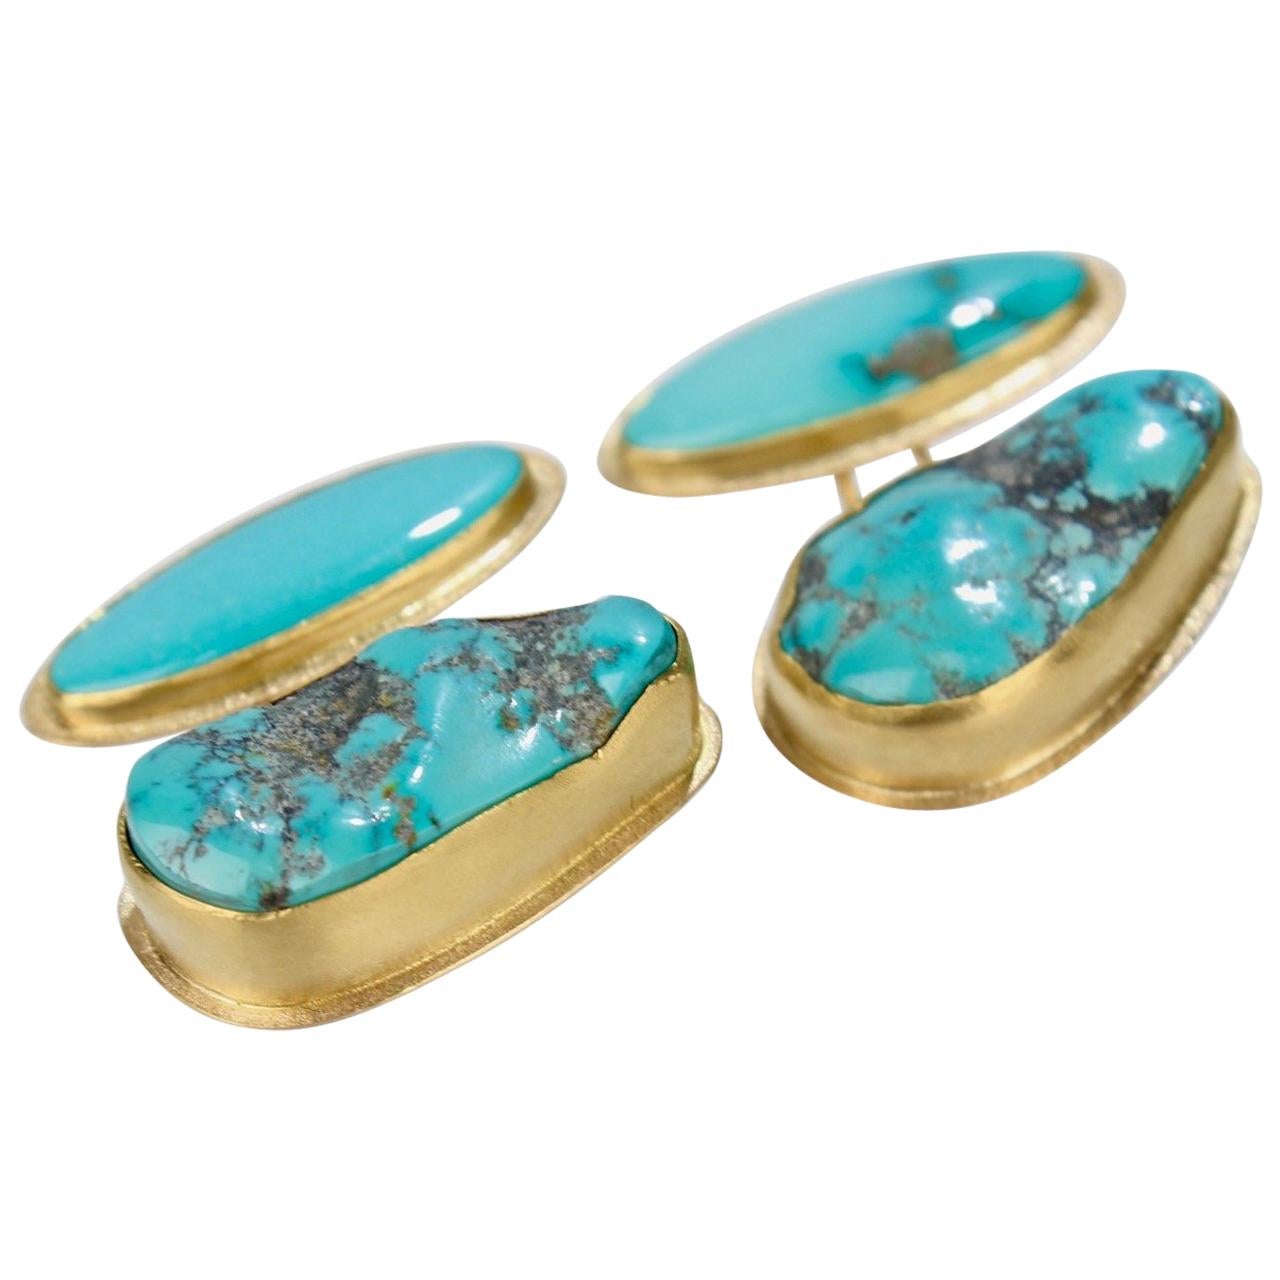 Isabelle Posillico Turquoise and Yellow Gold Cufflinks